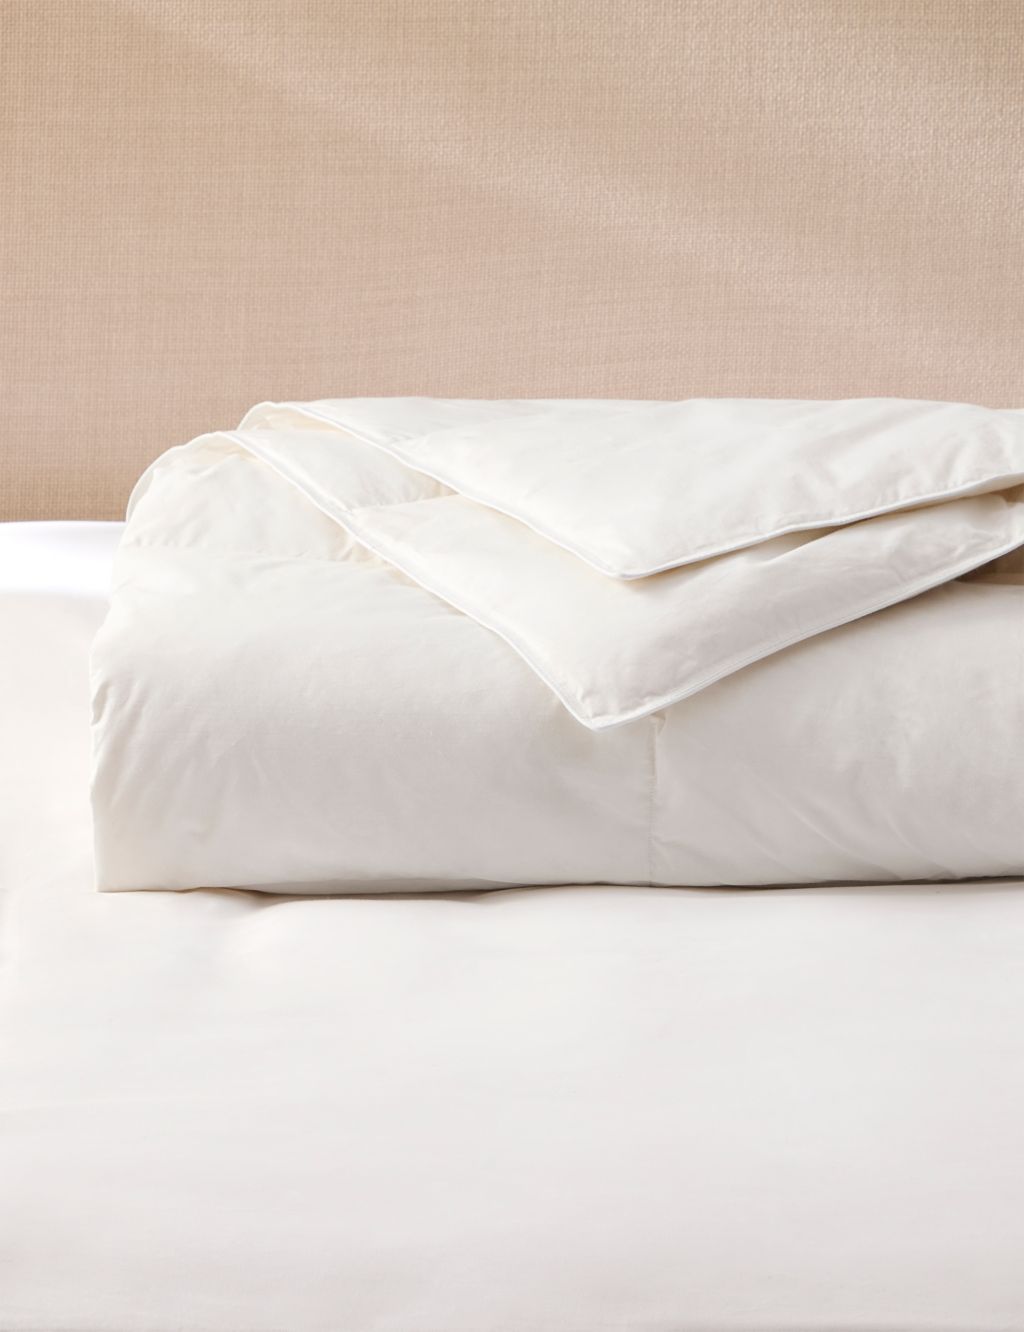 Duck Feather & Down 4.5 Tog Duvet image 1